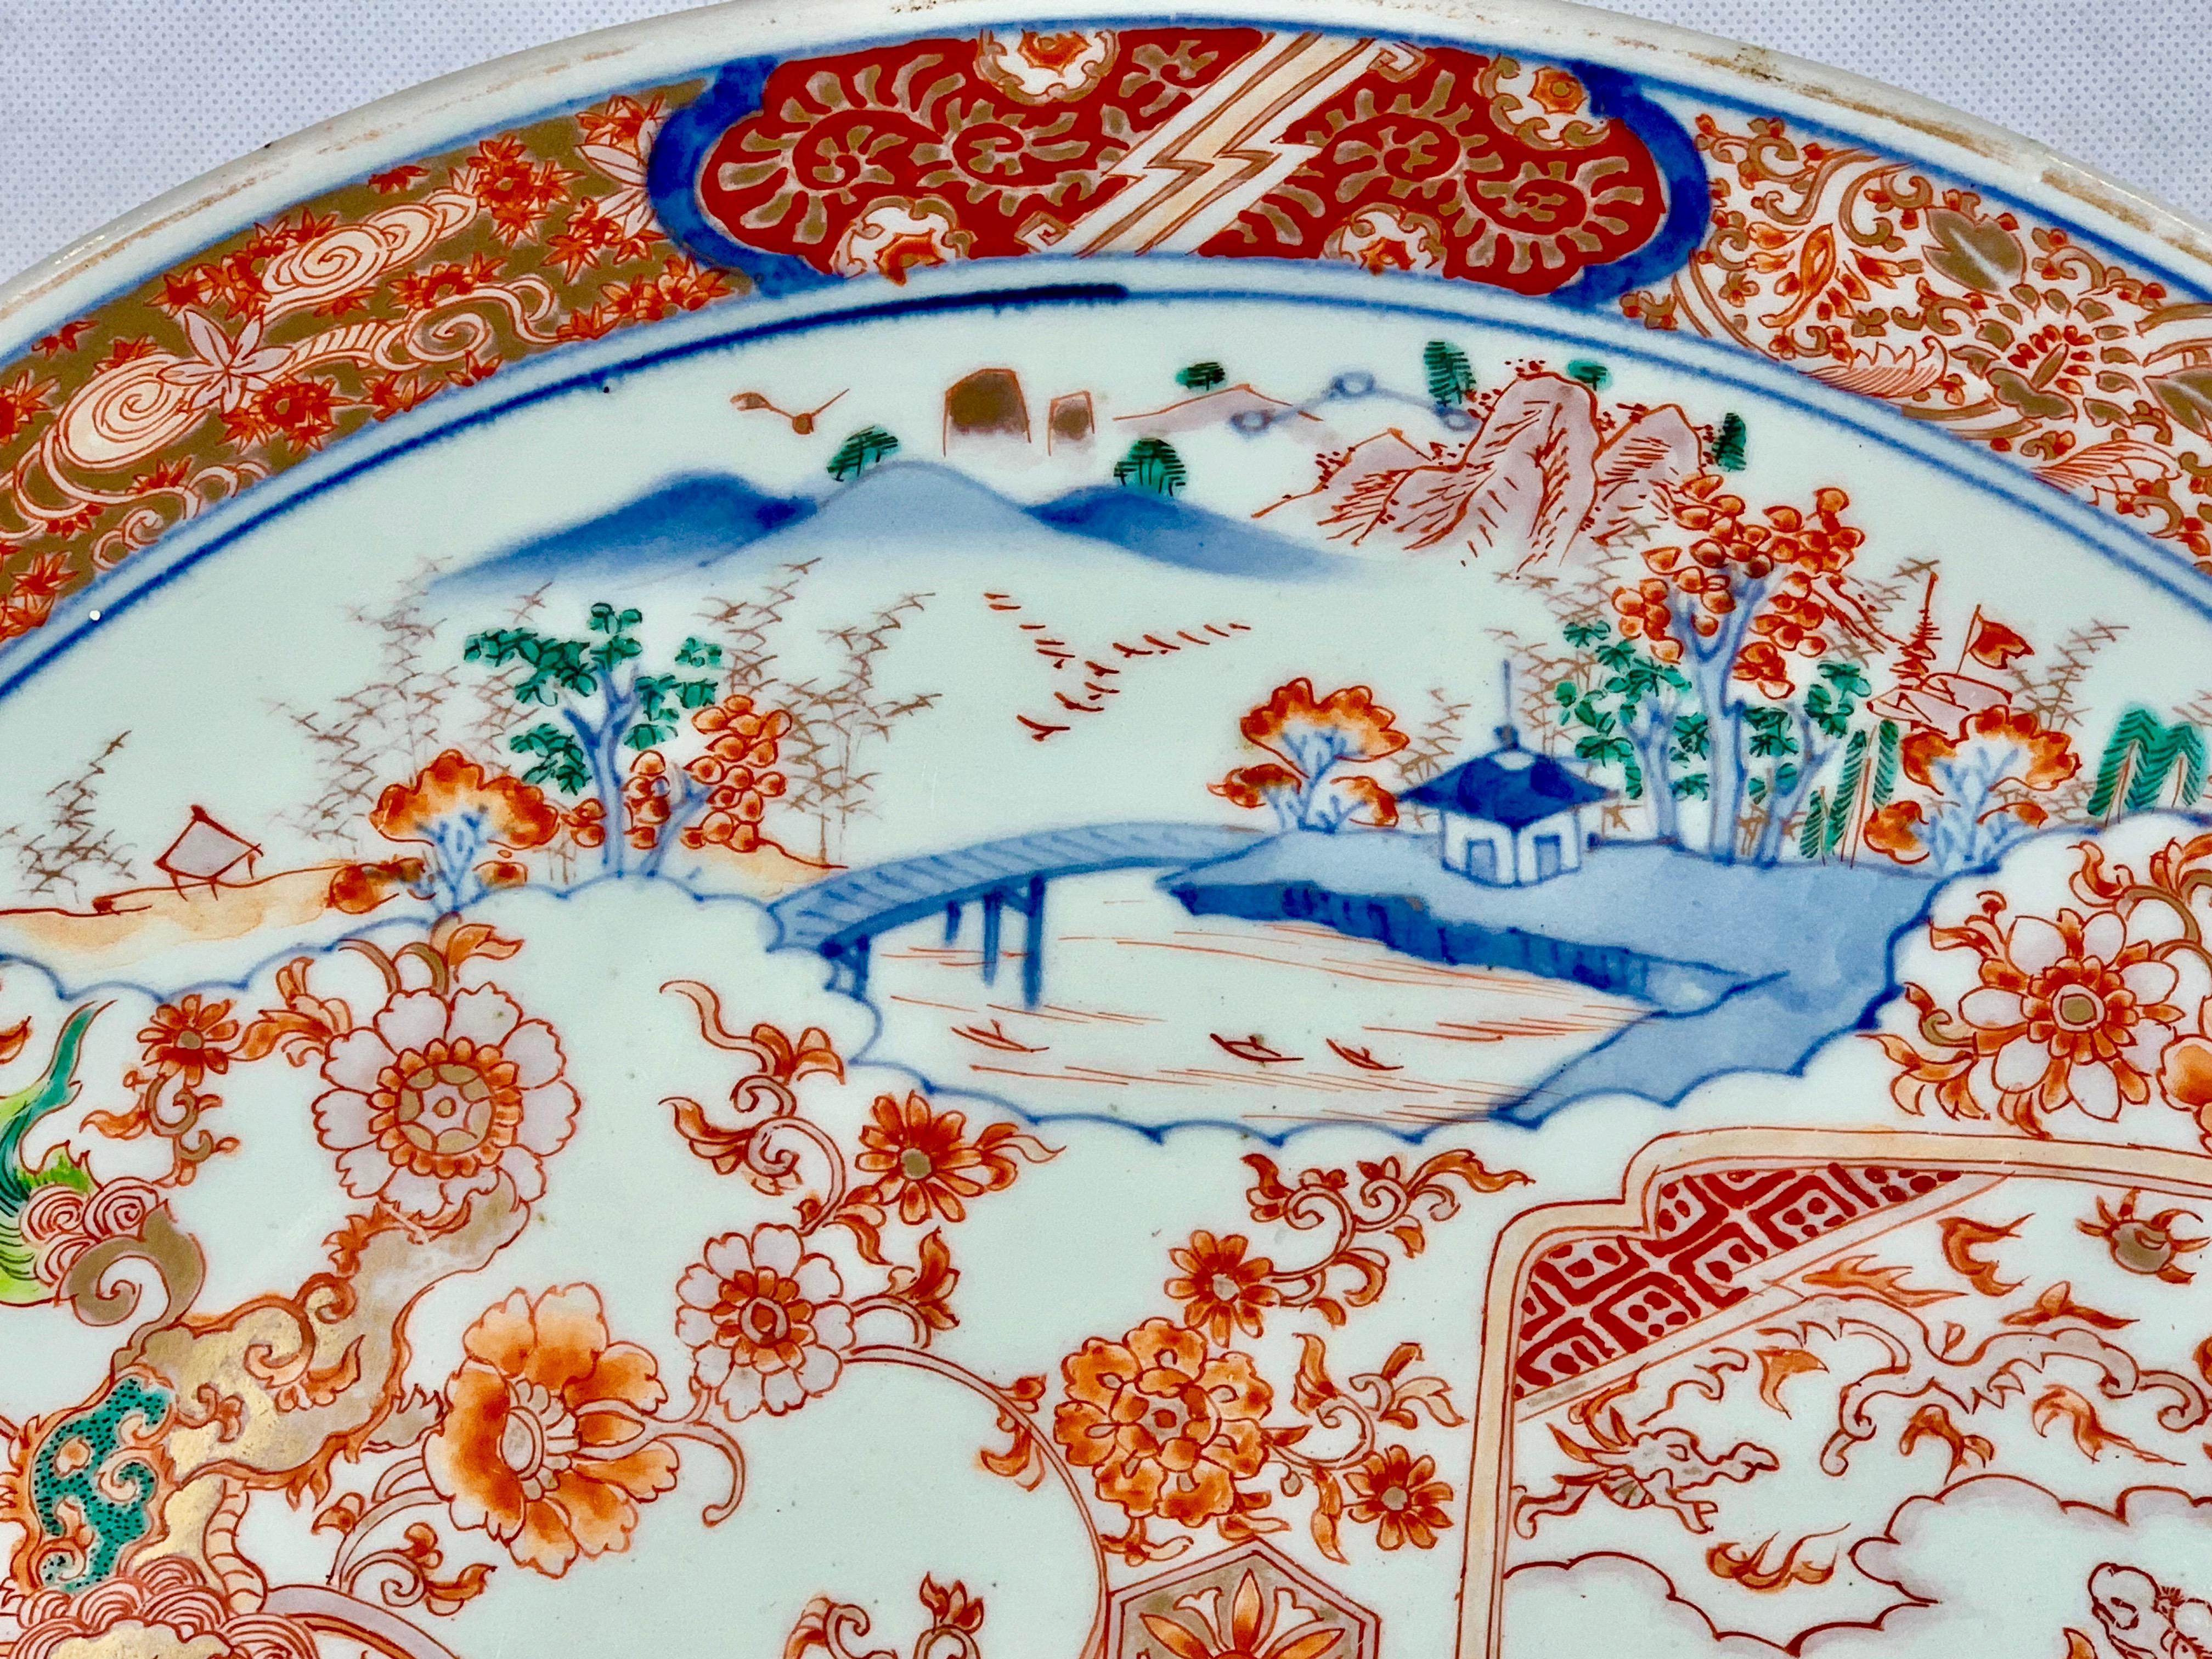 Large finely decorated Japanese Meiji period  Imari porcelain charger. The decoration consists of shaped panels overlayed on floral sprays. The stylized border has cloud forms on a fret work background. The enamel colors have a cobalt blue